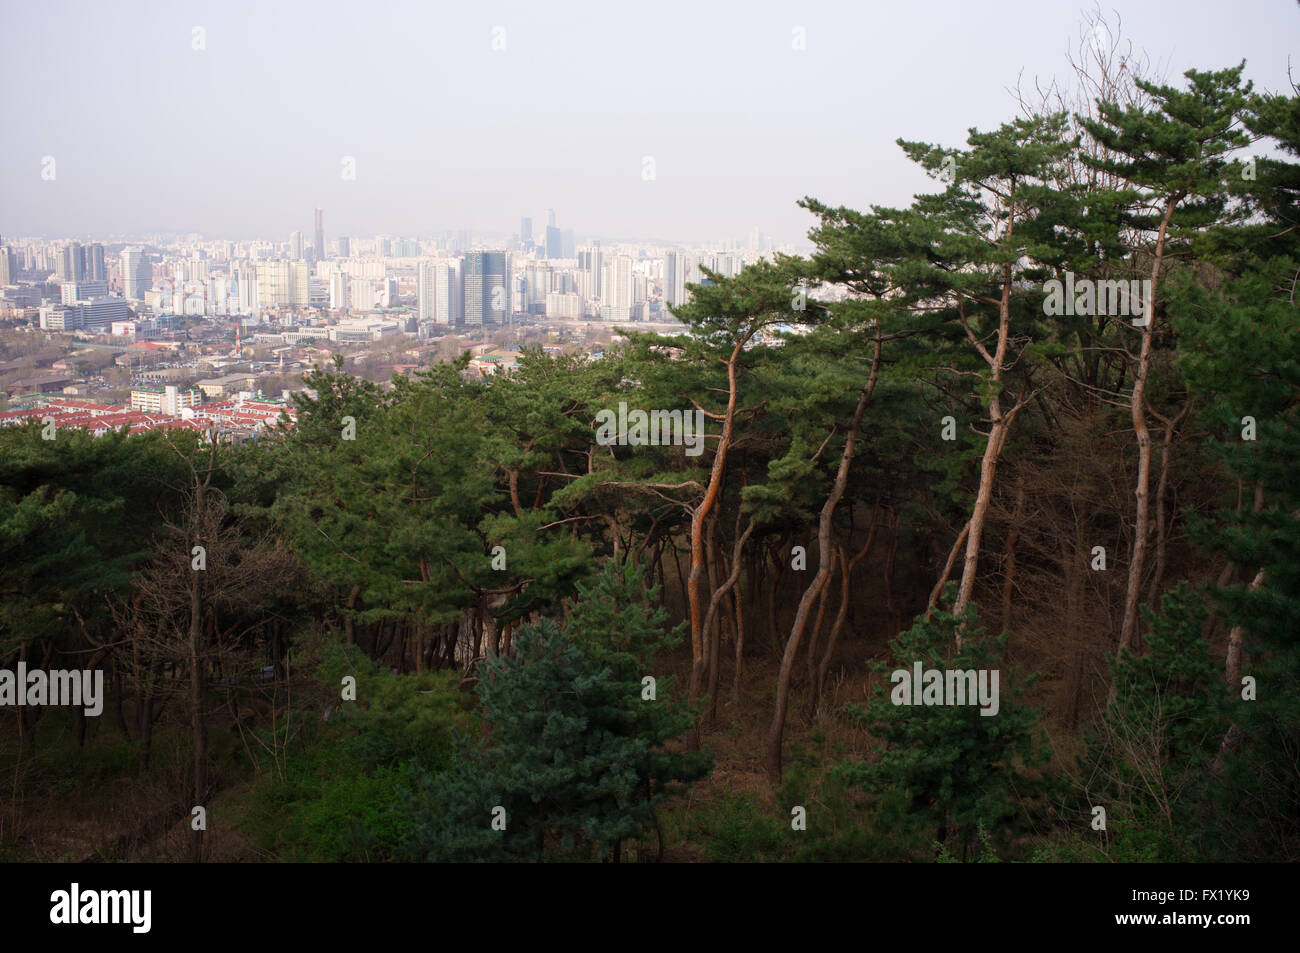 A view of southern Seoul, South Korea, from the slopes of Nam Mountain in early spring. Stock Photo